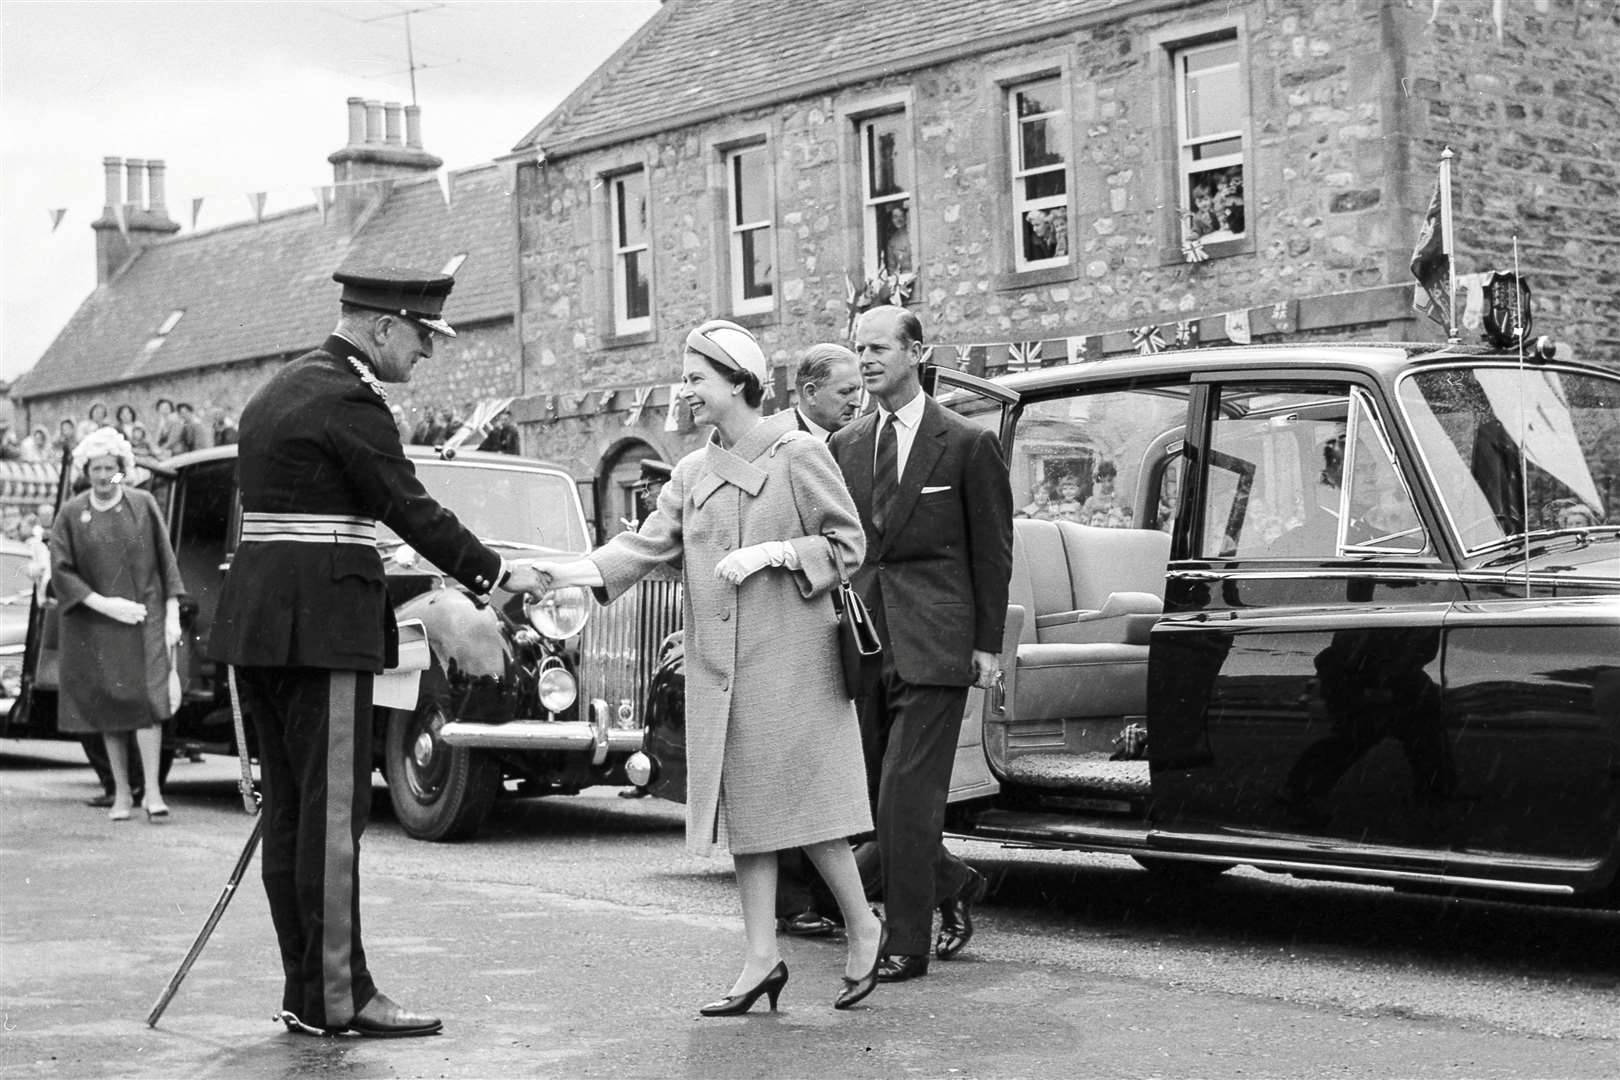 Arriving in Fochabers during August, 1961.